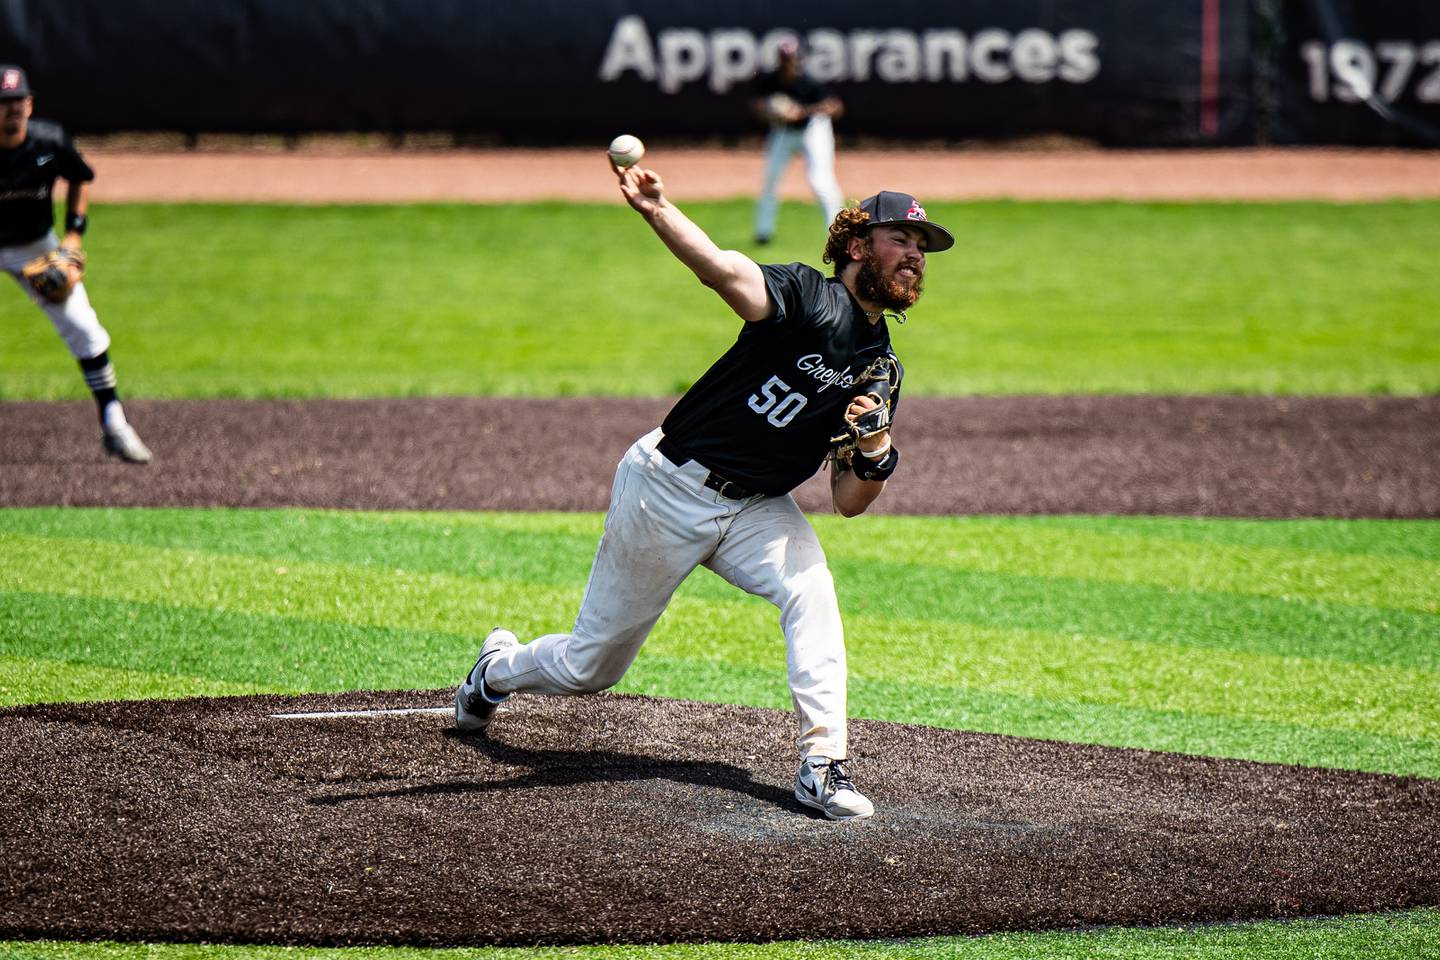 Hall alumnus Payton Plym delivers a pitch for the University of Indianapolis baseball team. Plym is 7-0 with two saves this season. Plym and the Greyhounds will play in the NCAA Division II World Series.